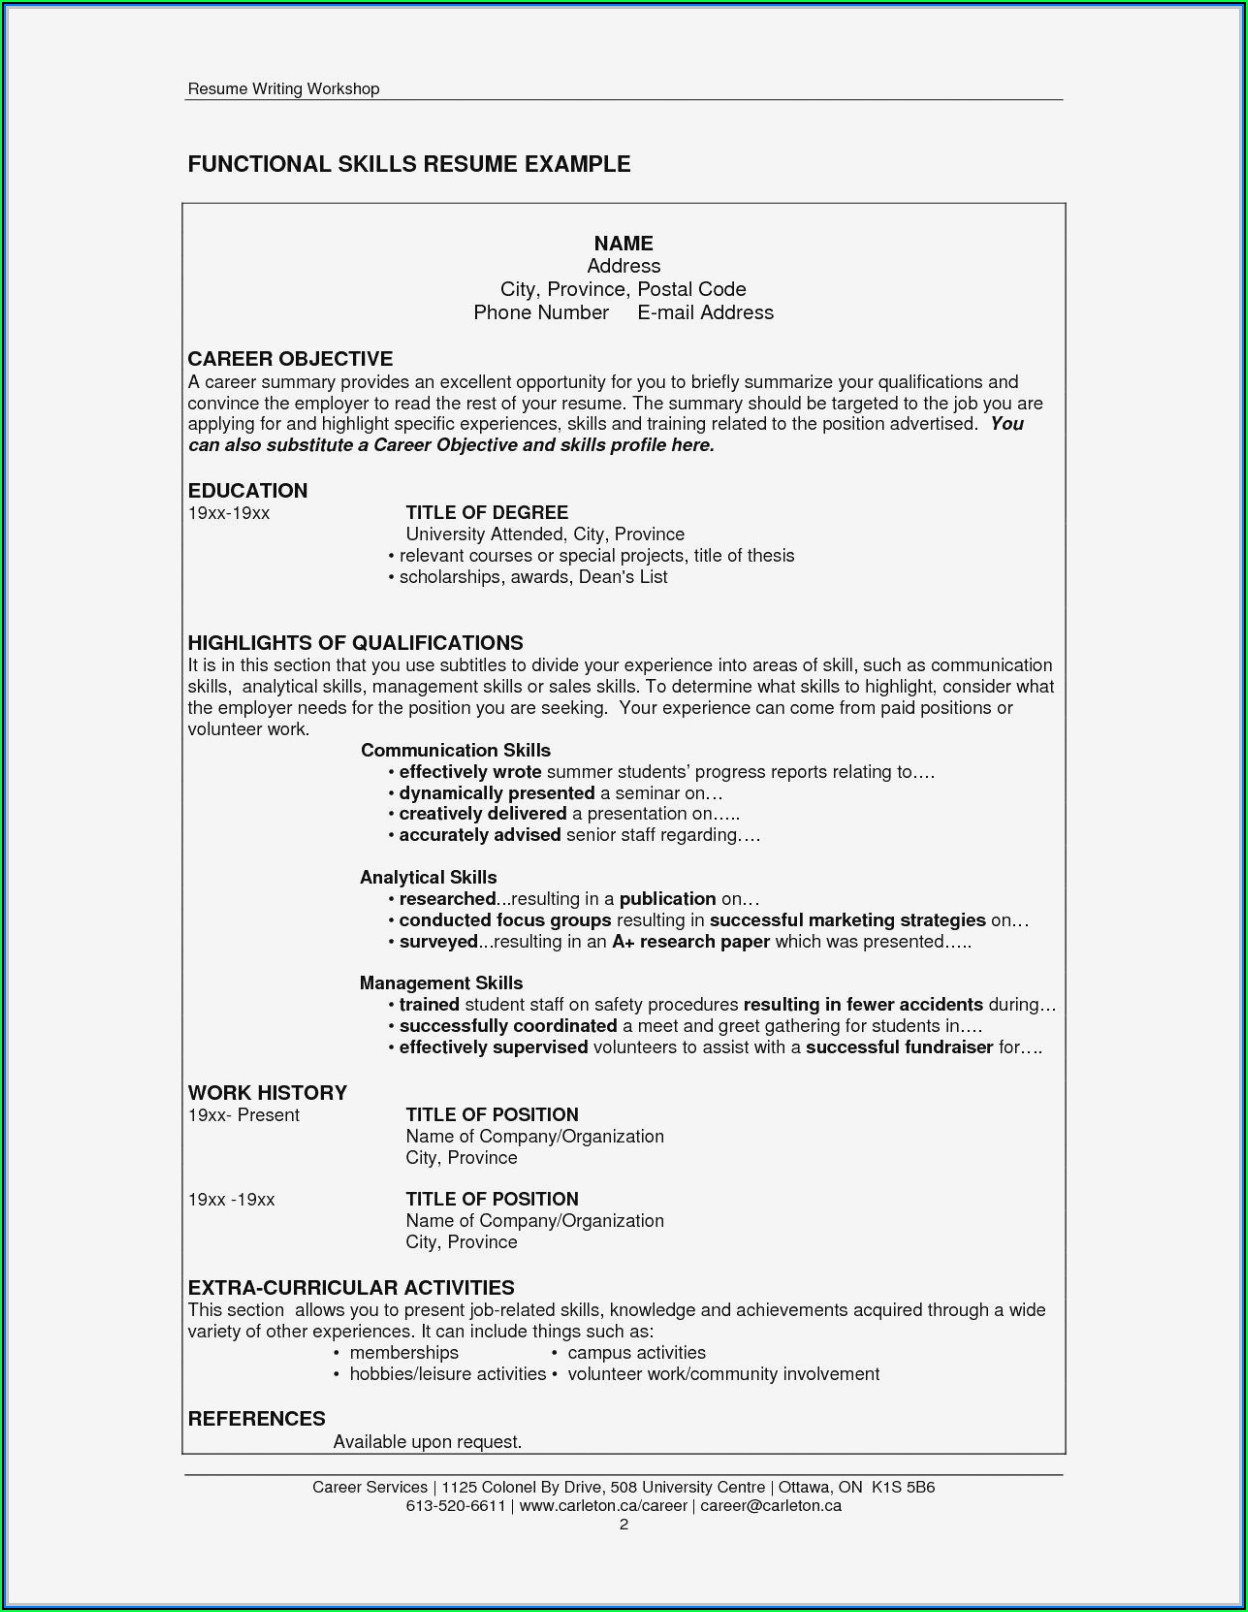 Dental Assistant Resume No Experience Examples